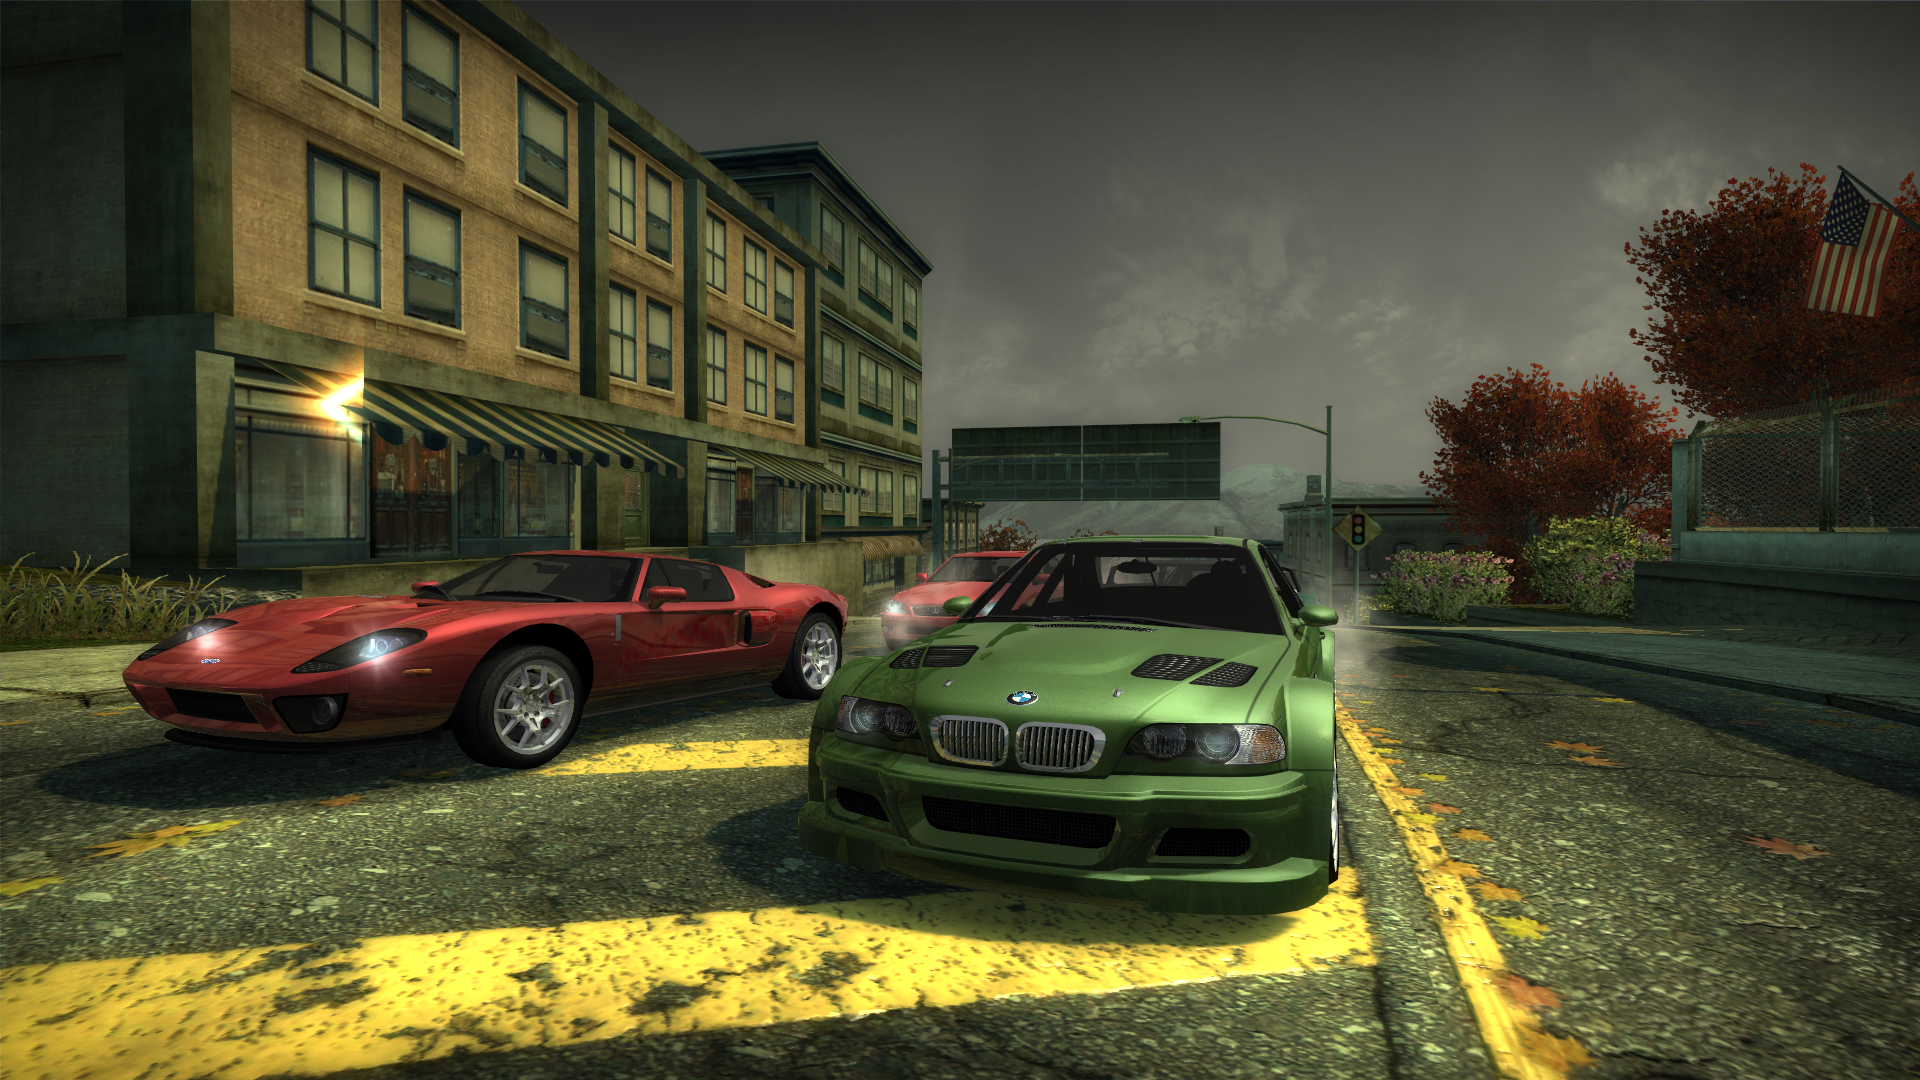 Most wanted hq. NFS most wanted 2005. Рокпорт город NFS. NFS most wanted Remastered.